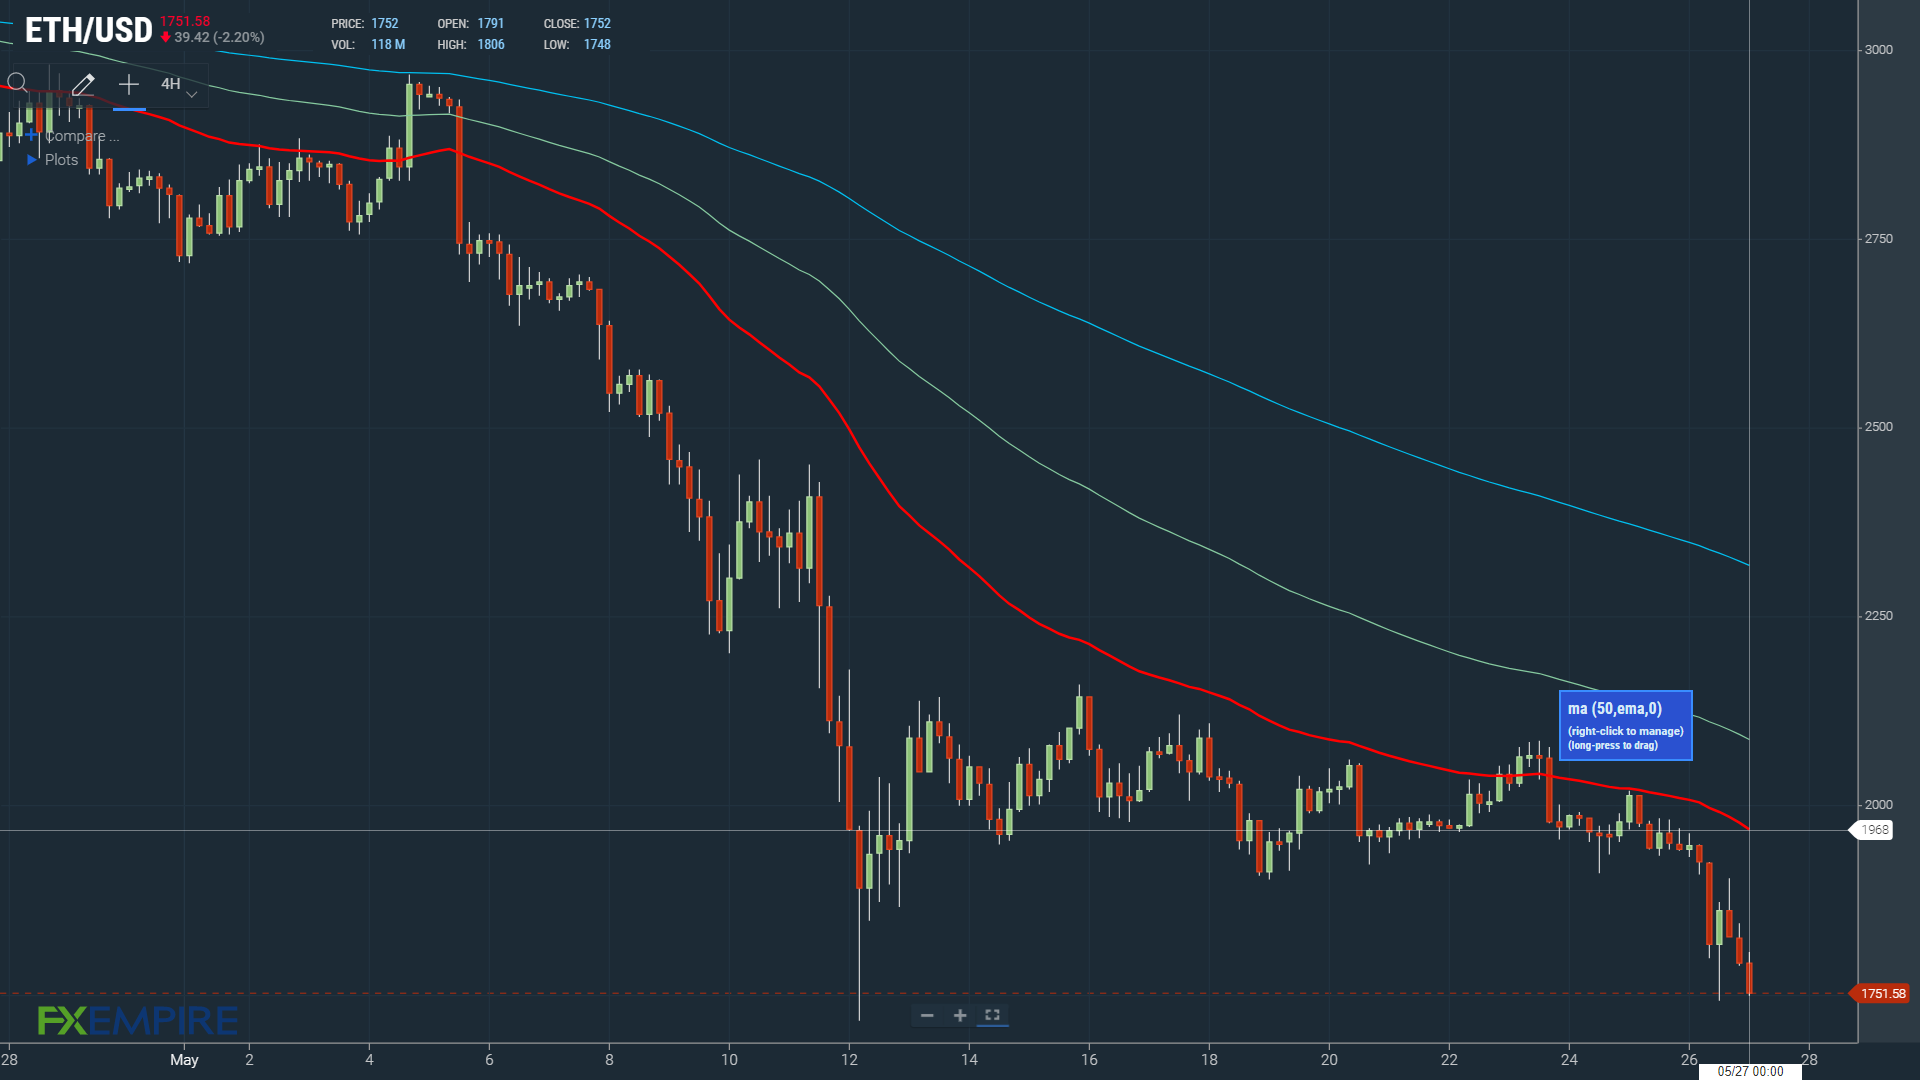 EMAs suggest more downside for ETH and the crypto market.